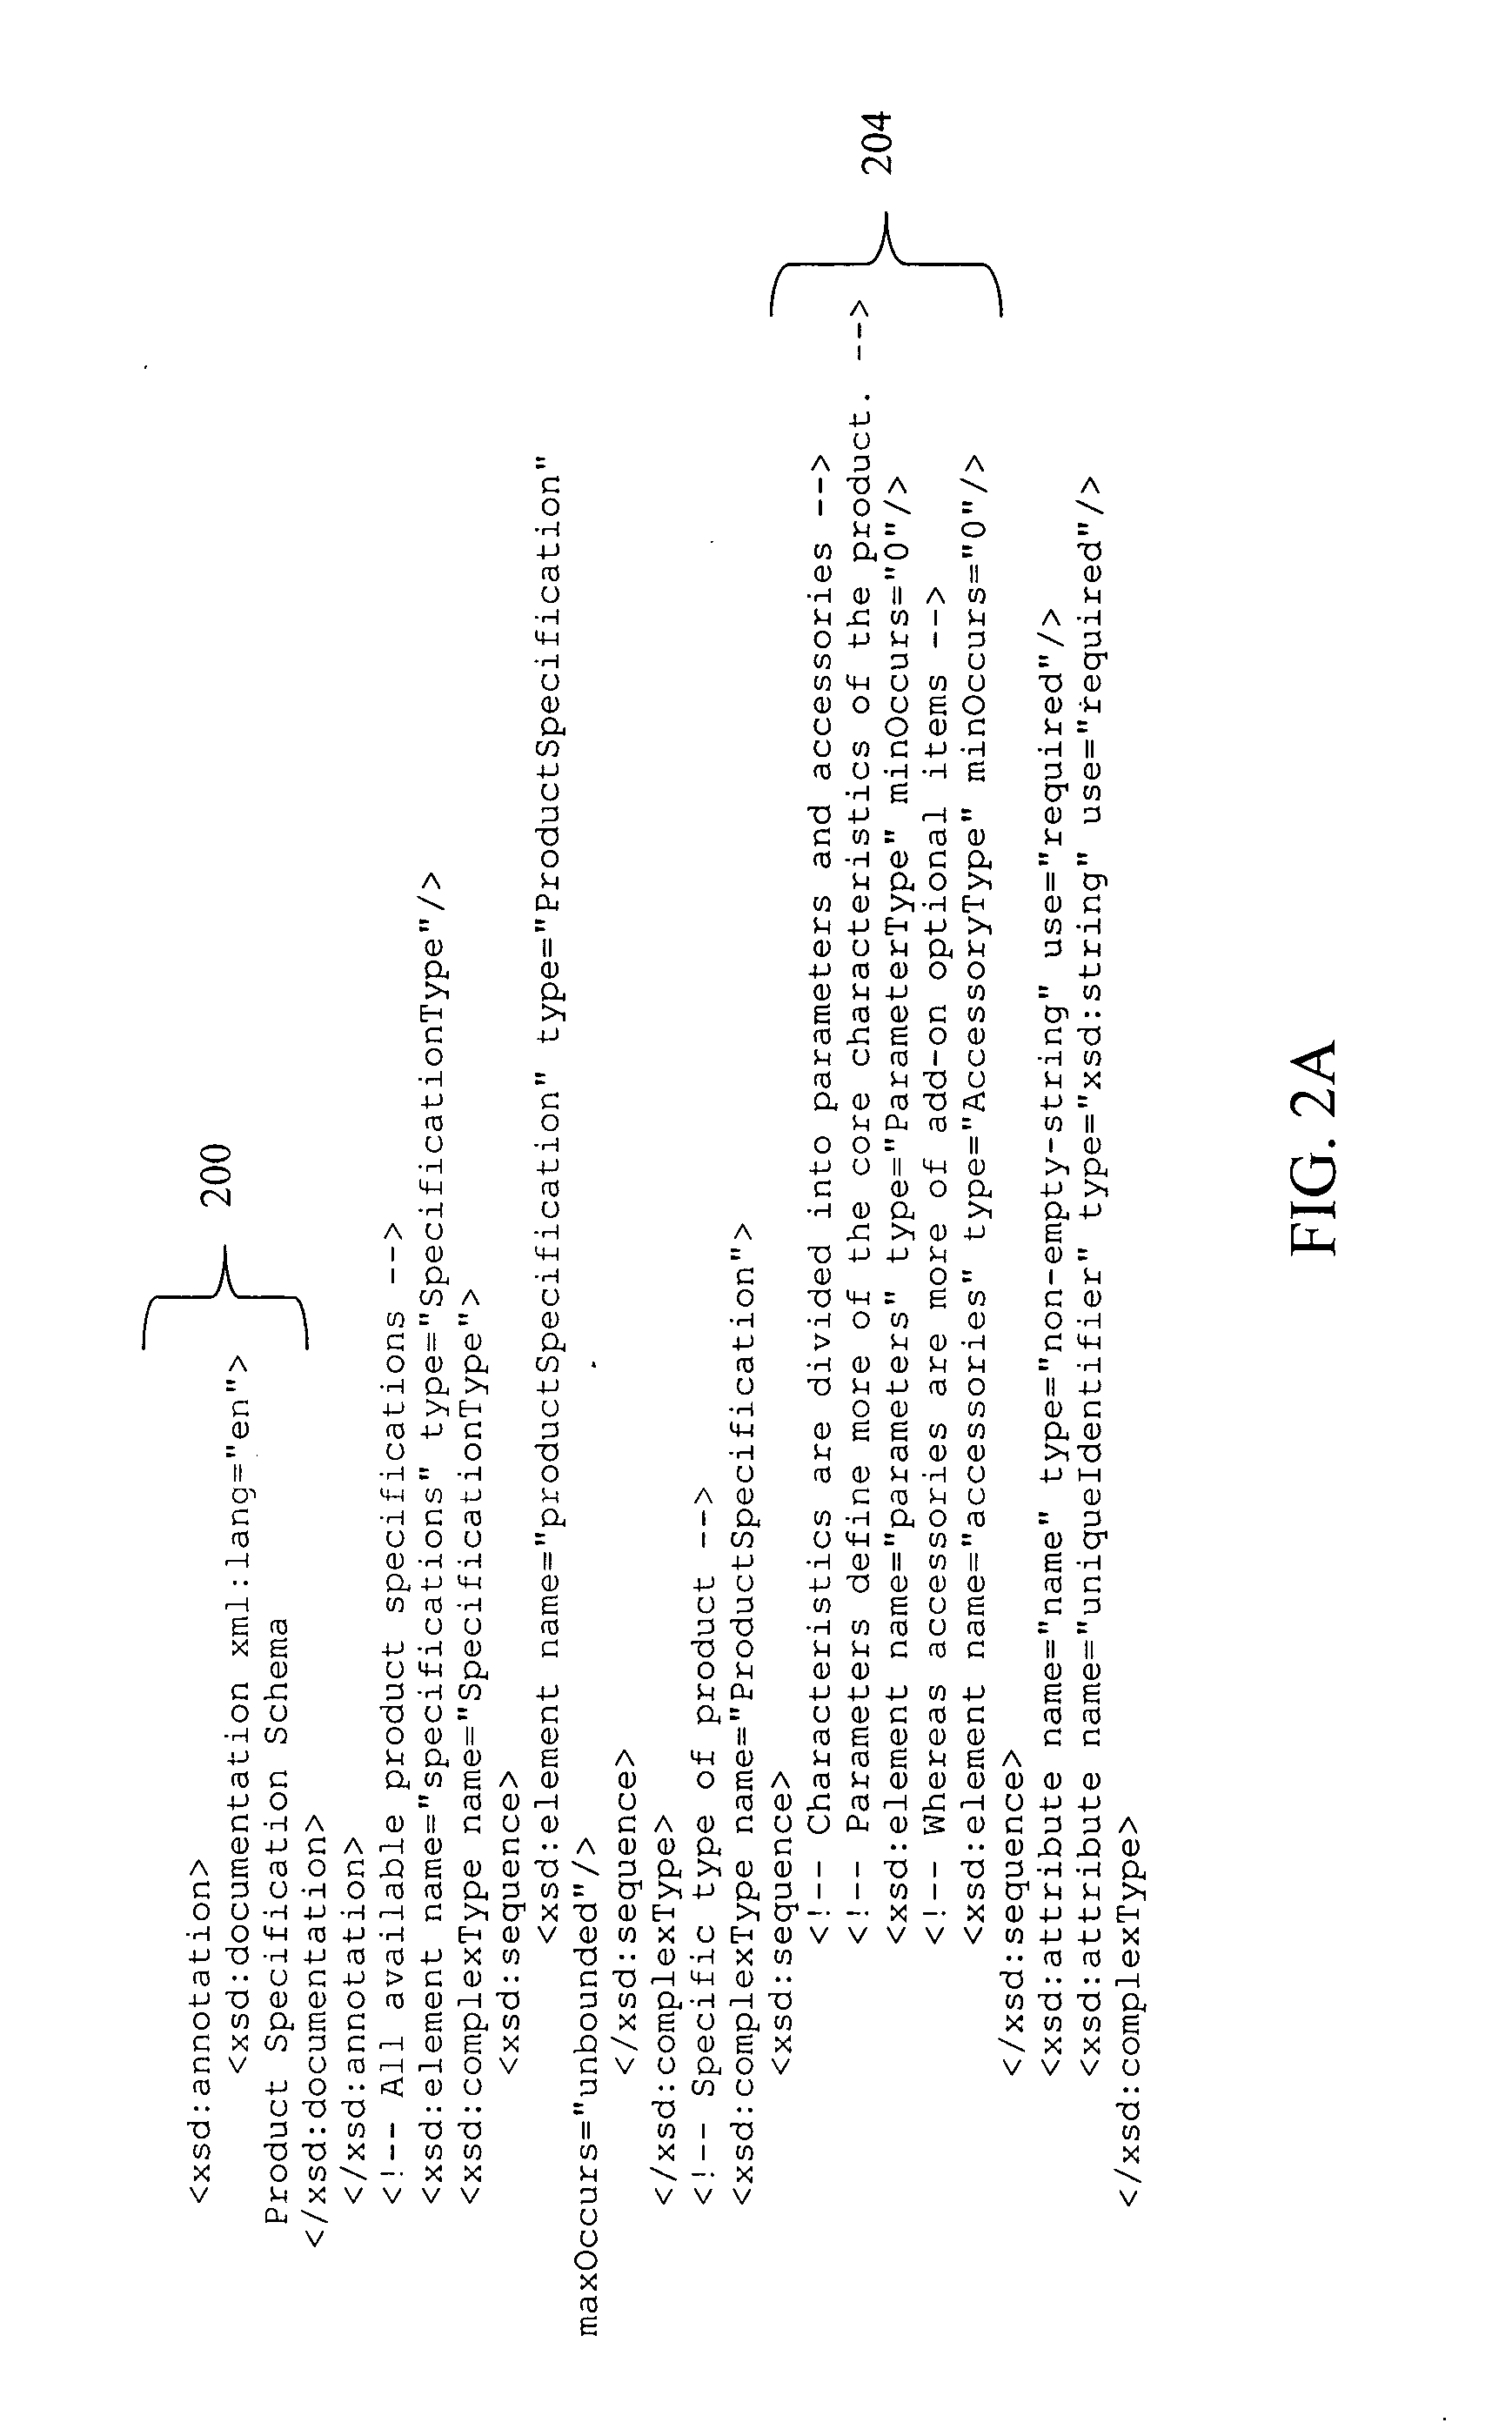 Generic product finder system and method